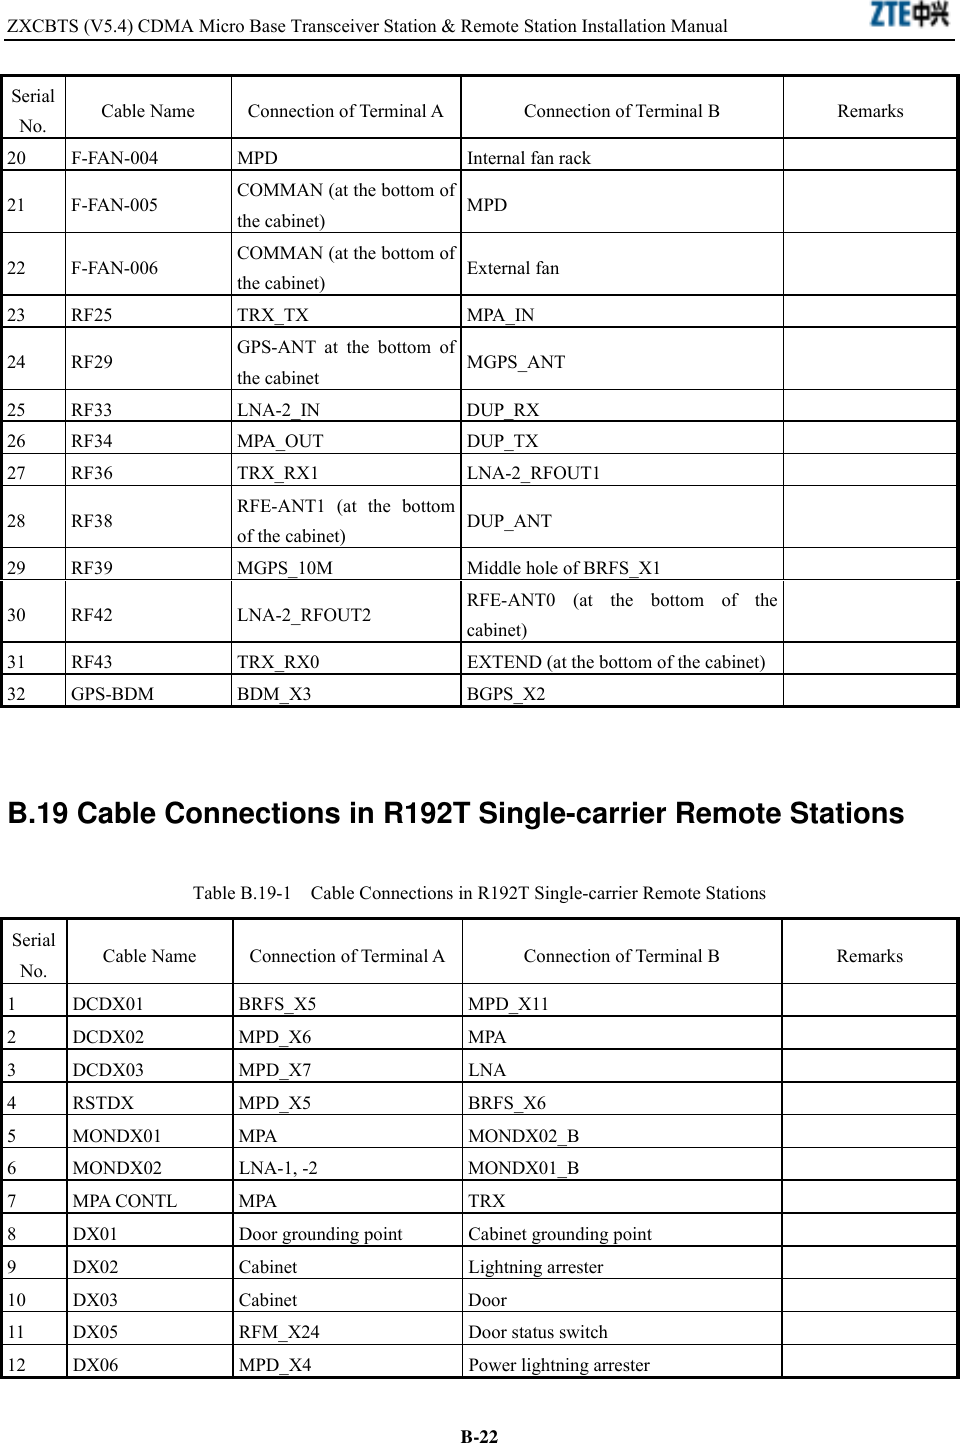 ZXCBTS (V5.4) CDMA Micro Base Transceiver Station &amp; Remote Station Installation Manual    B-22Serial No.  Cable Name  Connection of Terminal A Connection of Terminal B  Remarks 20  F-FAN-004  MPD  Internal fan rack   21 F-FAN-005  COMMAN (at the bottom of the cabinet)  MPD  22 F-FAN-006  COMMAN (at the bottom of the cabinet)  External fan   23 RF25  TRX_TX  MPA_IN   24 RF29  GPS-ANT at the bottom of the cabinet  MGPS_ANT  25 RF33  LNA-2_IN  DUP_RX   26 RF34  MPA_OUT  DUP_TX   27 RF36  TRX_RX1  LNA-2_RFOUT1   28 RF38  RFE-ANT1 (at the bottom of the cabinet)  DUP_ANT  29  RF39  MGPS_10M  Middle hole of BRFS_X1   30 RF42  LNA-2_RFOUT2  RFE-ANT0 (at the bottom of the cabinet)   31  RF43  TRX_RX0  EXTEND (at the bottom of the cabinet)   32 GPS-BDM  BDM_X3  BGPS_X2    B.19 Cable Connections in R192T Single-carrier Remote Stations Table B.19-1    Cable Connections in R192T Single-carrier Remote Stations Serial No.  Cable Name  Connection of Terminal A Connection of Terminal B  Remarks 1 DCDX01  BRFS_X5  MPD_X11   2 DCDX02  MPD_X6  MPA   3 DCDX03  MPD_X7  LNA   4 RSTDX  MPD_X5  BRFS_X6   5 MONDX01  MPA  MONDX02_B   6 MONDX02  LNA-1, -2  MONDX01_B   7 MPA CONTL  MPA  TRX   8  DX01  Door grounding point  Cabinet grounding point   9 DX02  Cabinet  Lightning arrester    10 DX03  Cabinet  Door   11  DX05  RFM_X24  Door status switch   12  DX06  MPD_X4  Power lightning arrester   